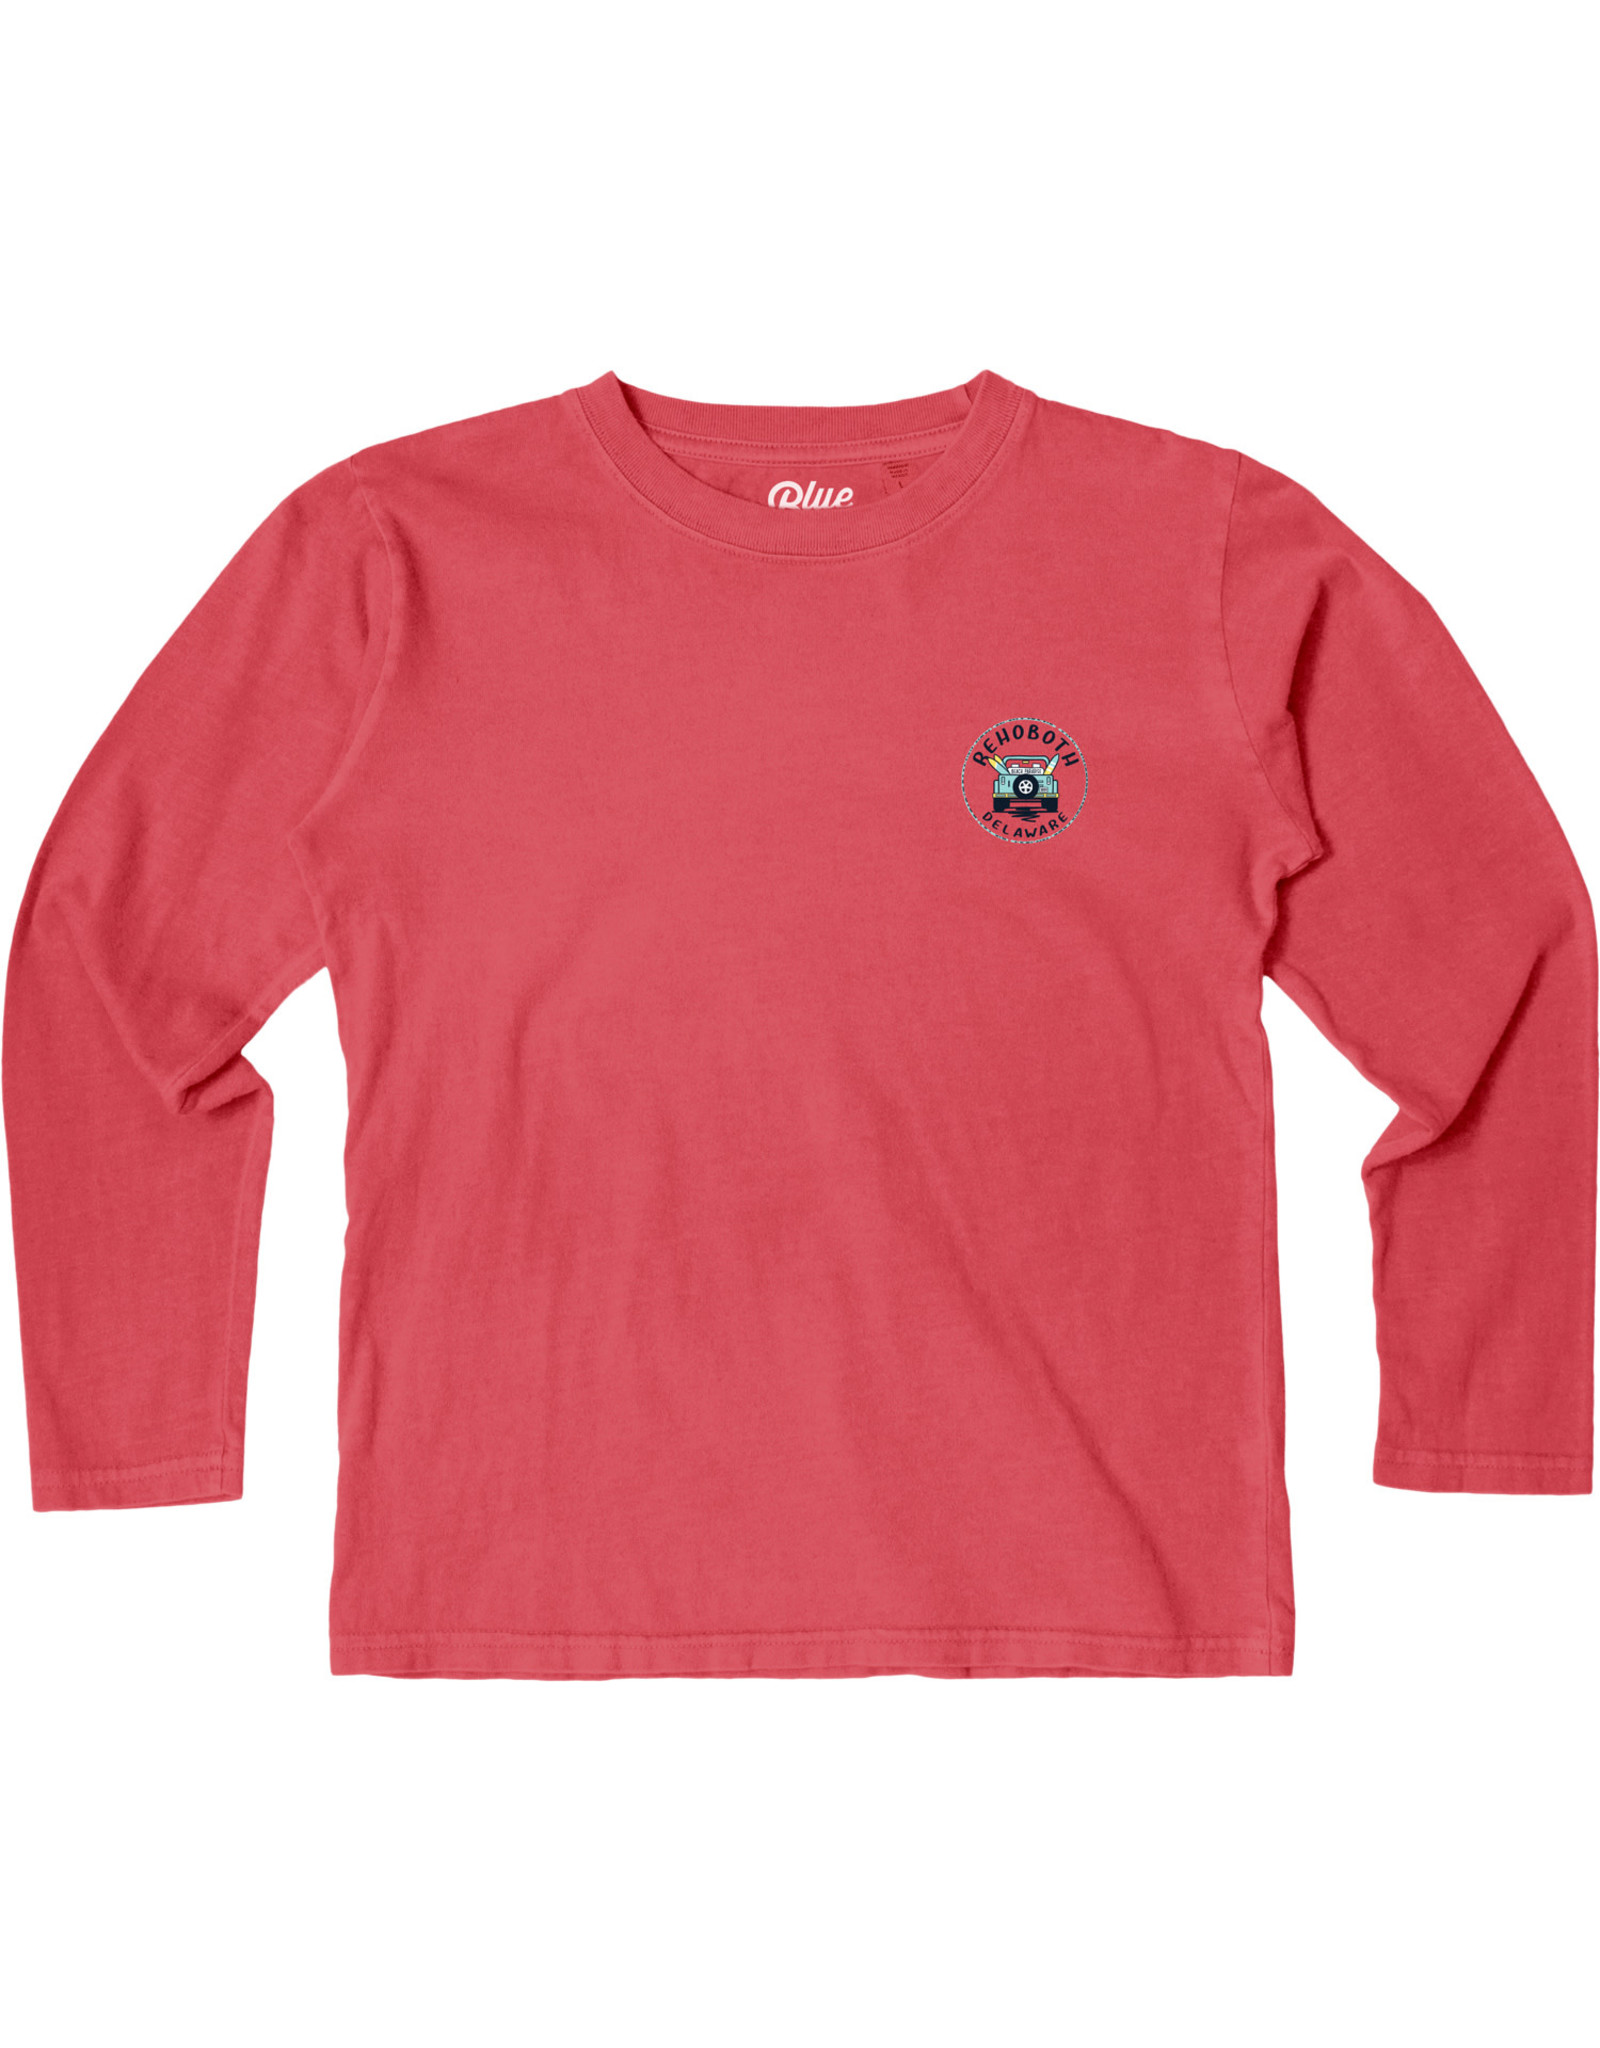 BLUE 84 CONCURRENCE JEEP YOUTH LS TEE